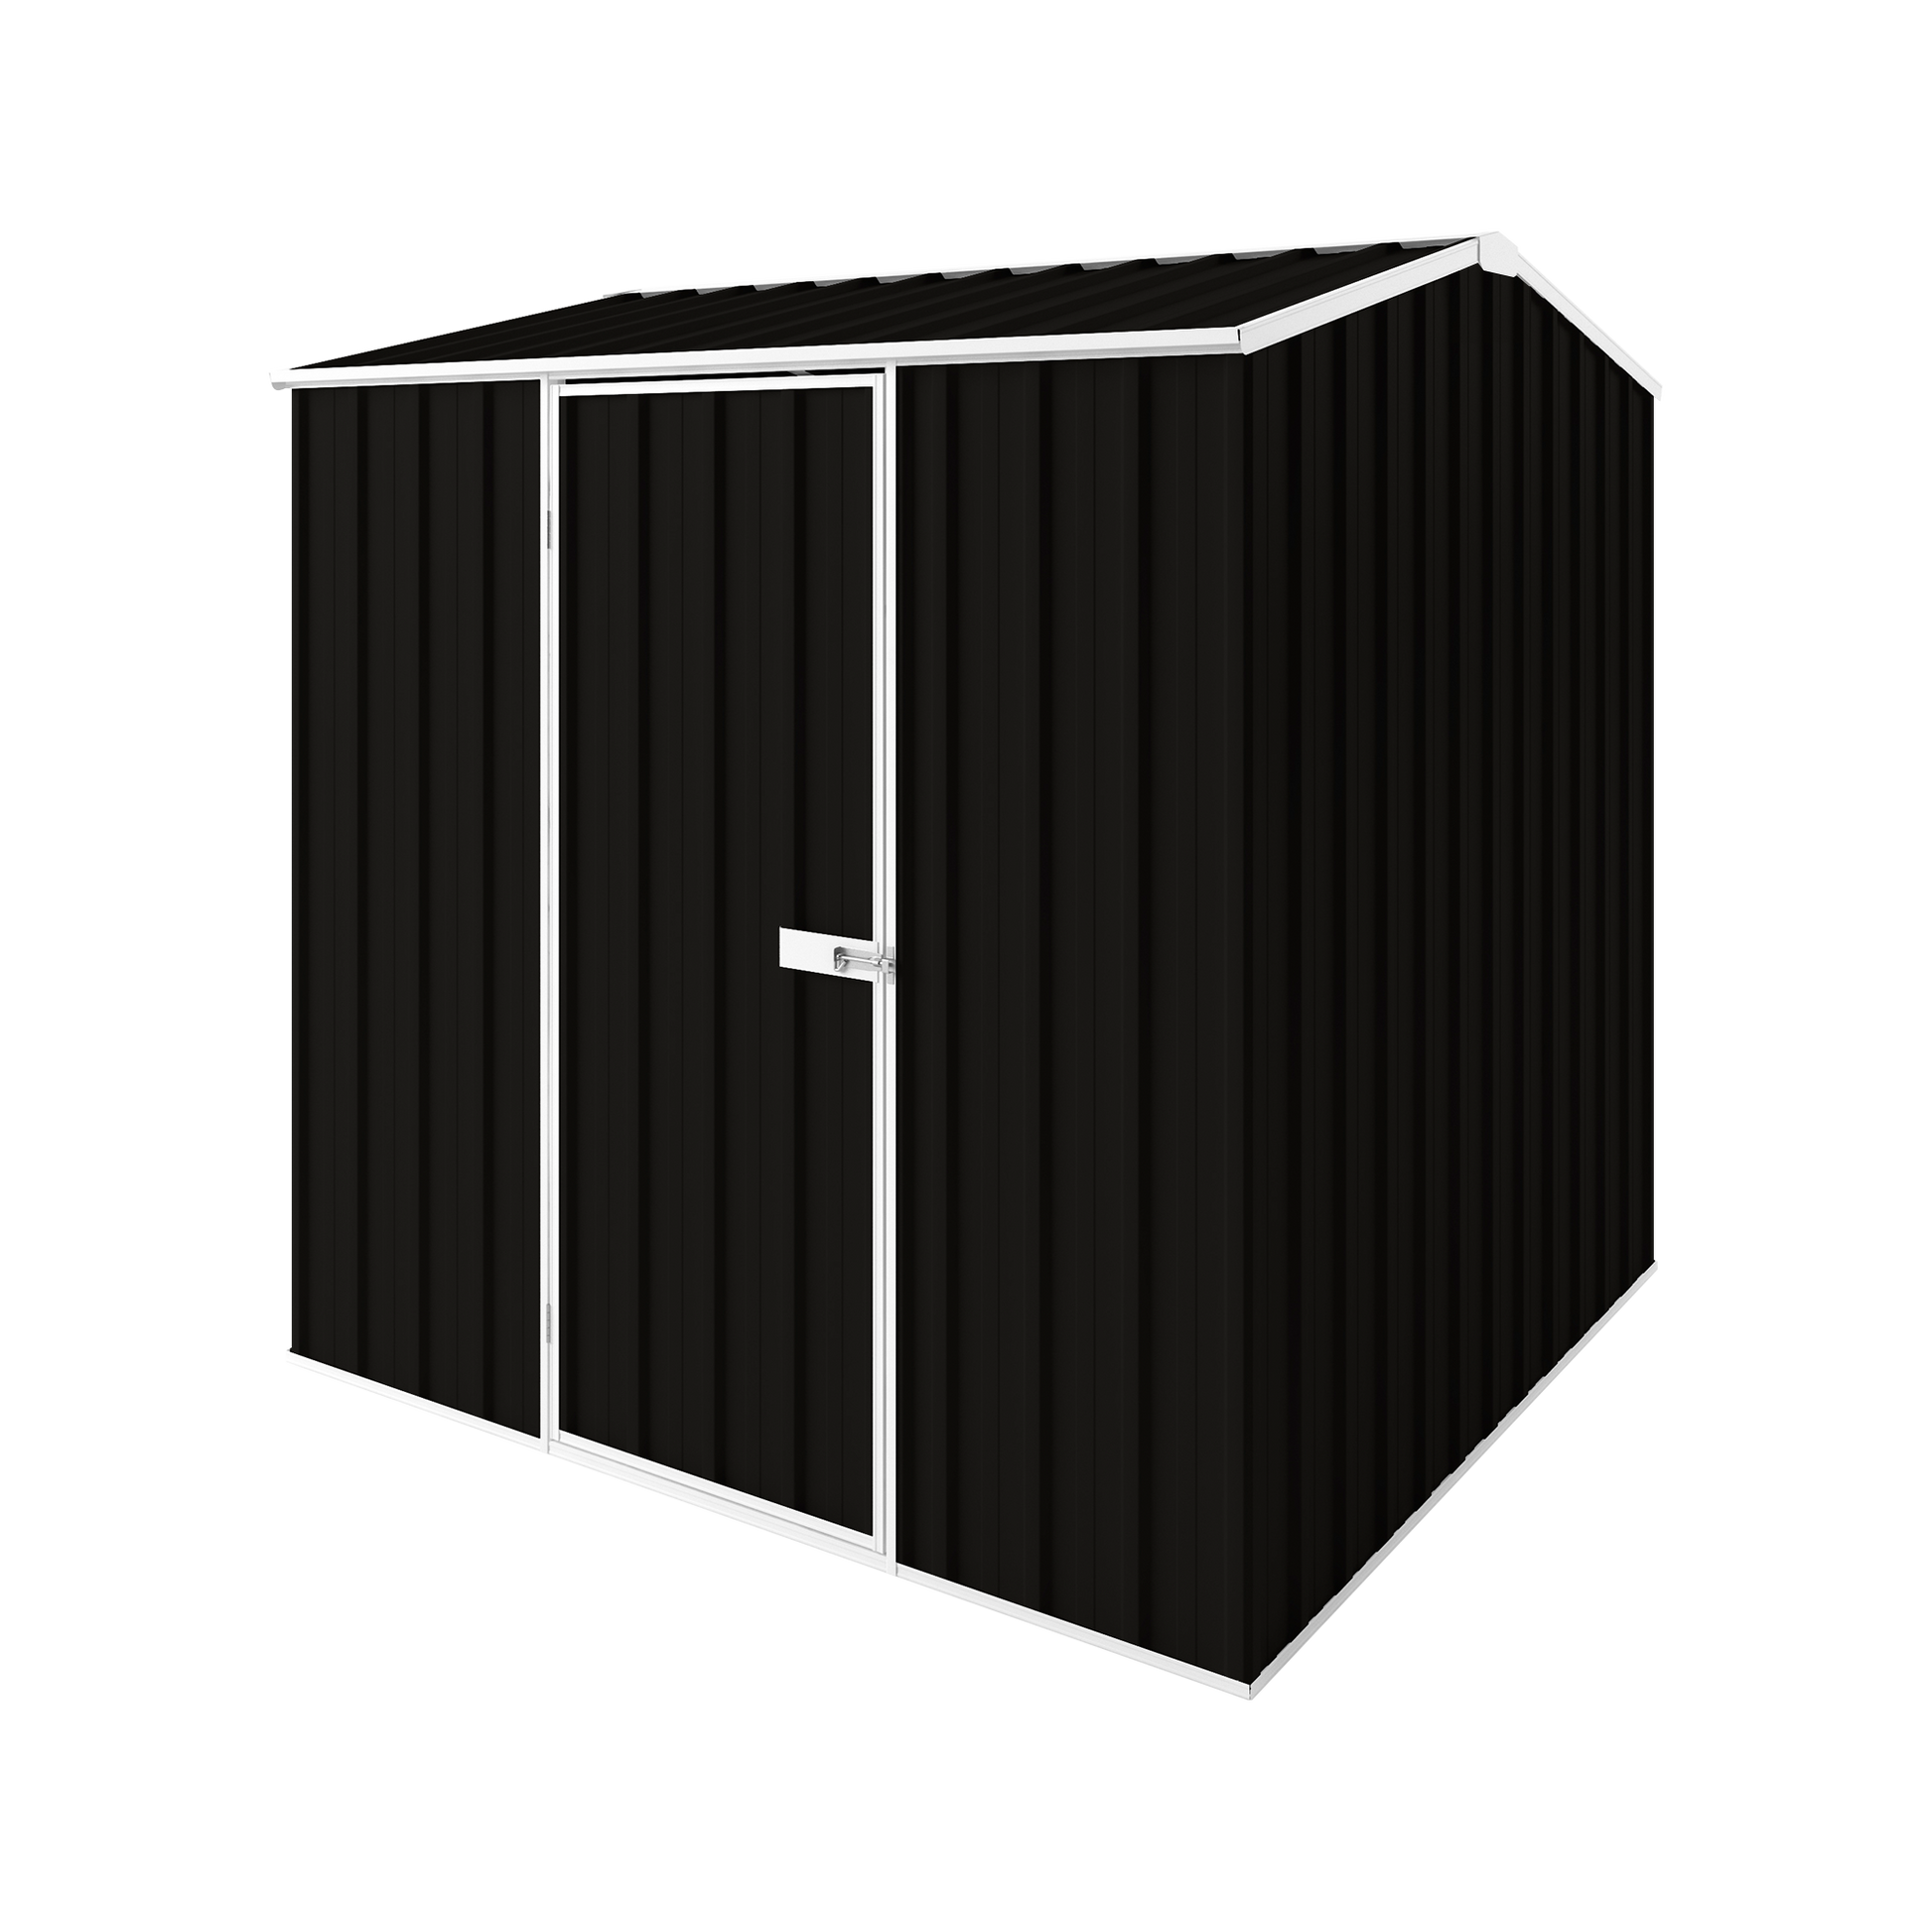 2.25m x 2.25m Gable Roof Garden Shed - EasyShed